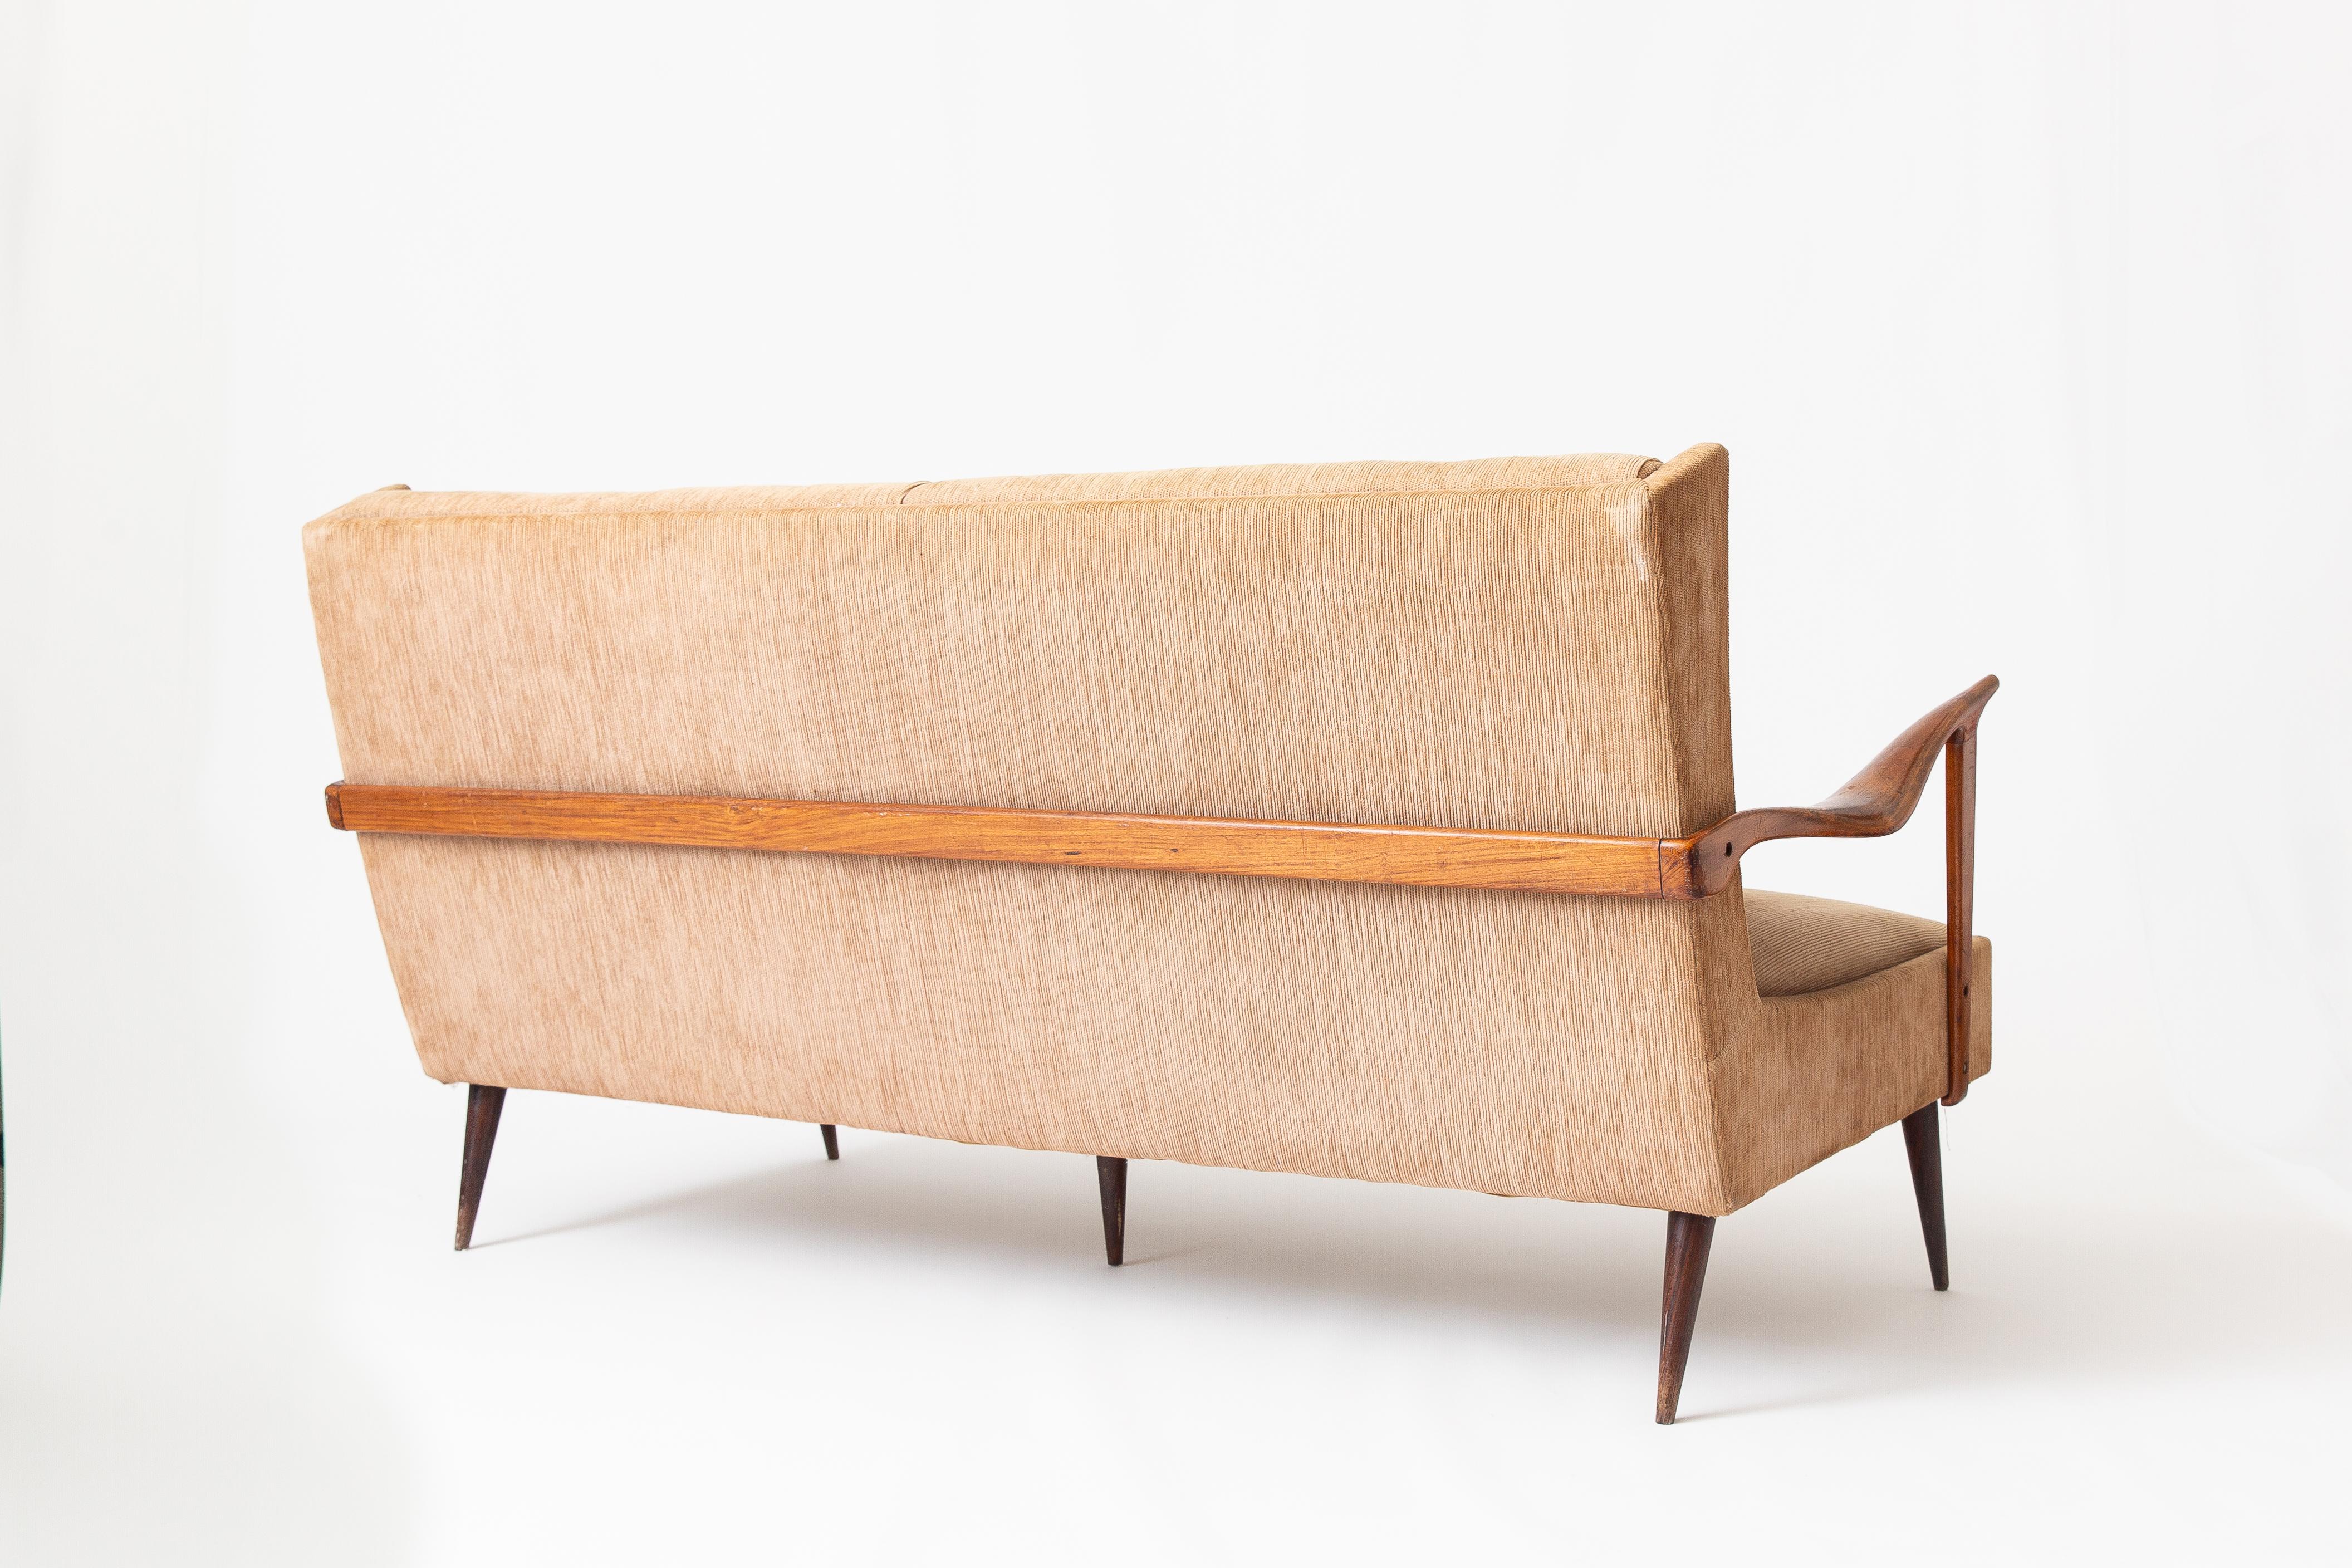 Beautiful vintage sofa by Giuseppe Scapinelli, an Italian born designer based in Brazil. Known for his unique designs blending Italian craftsmanship with sensual Brazilian curves and materials. 

Can be reupholstered upon clients request as an extra